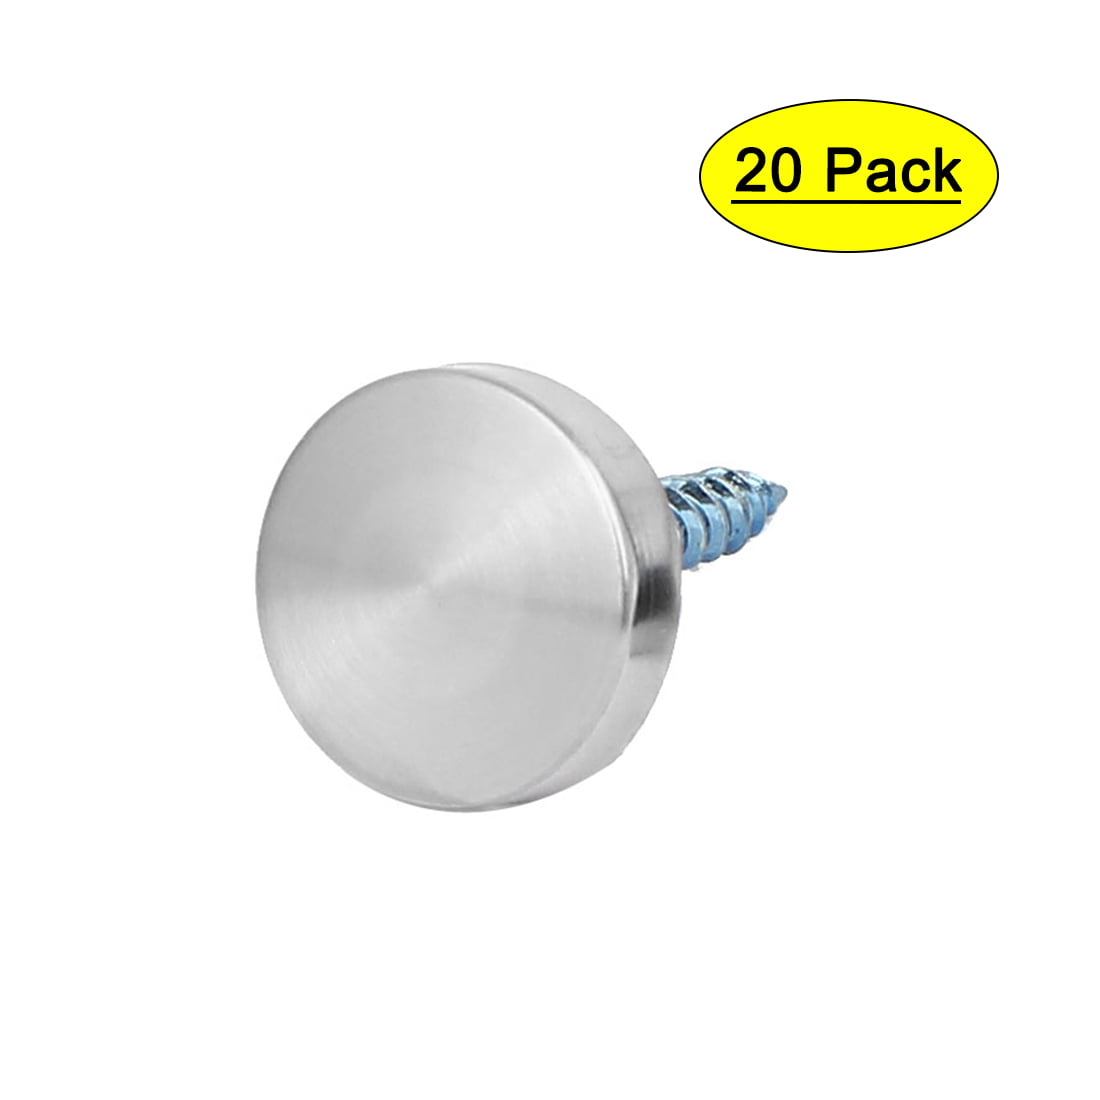 Details about   8 Pcs Stainless Steel Cap Cover Decorative Mirror Screws-wuH Jc 